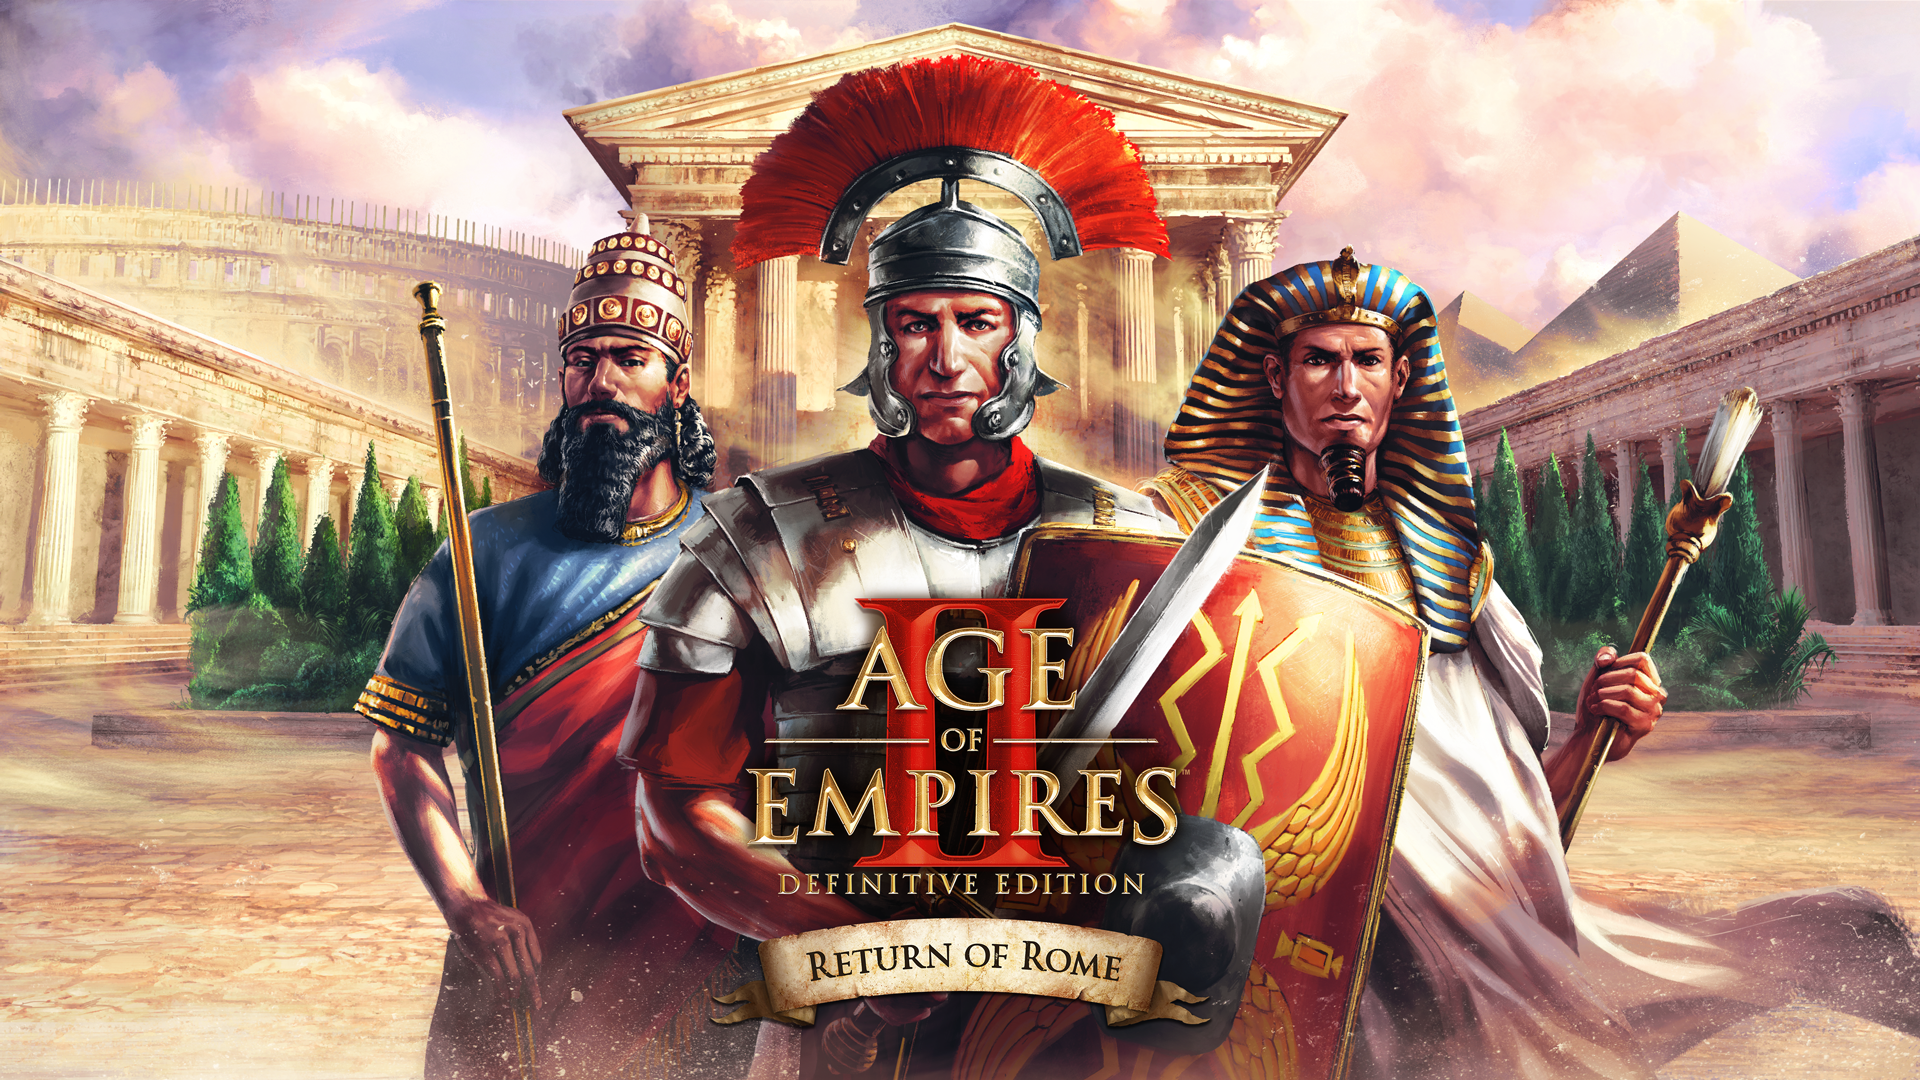 https://static.wikia.nocookie.net/ageofempires/images/6/68/Return_of_Rome.png